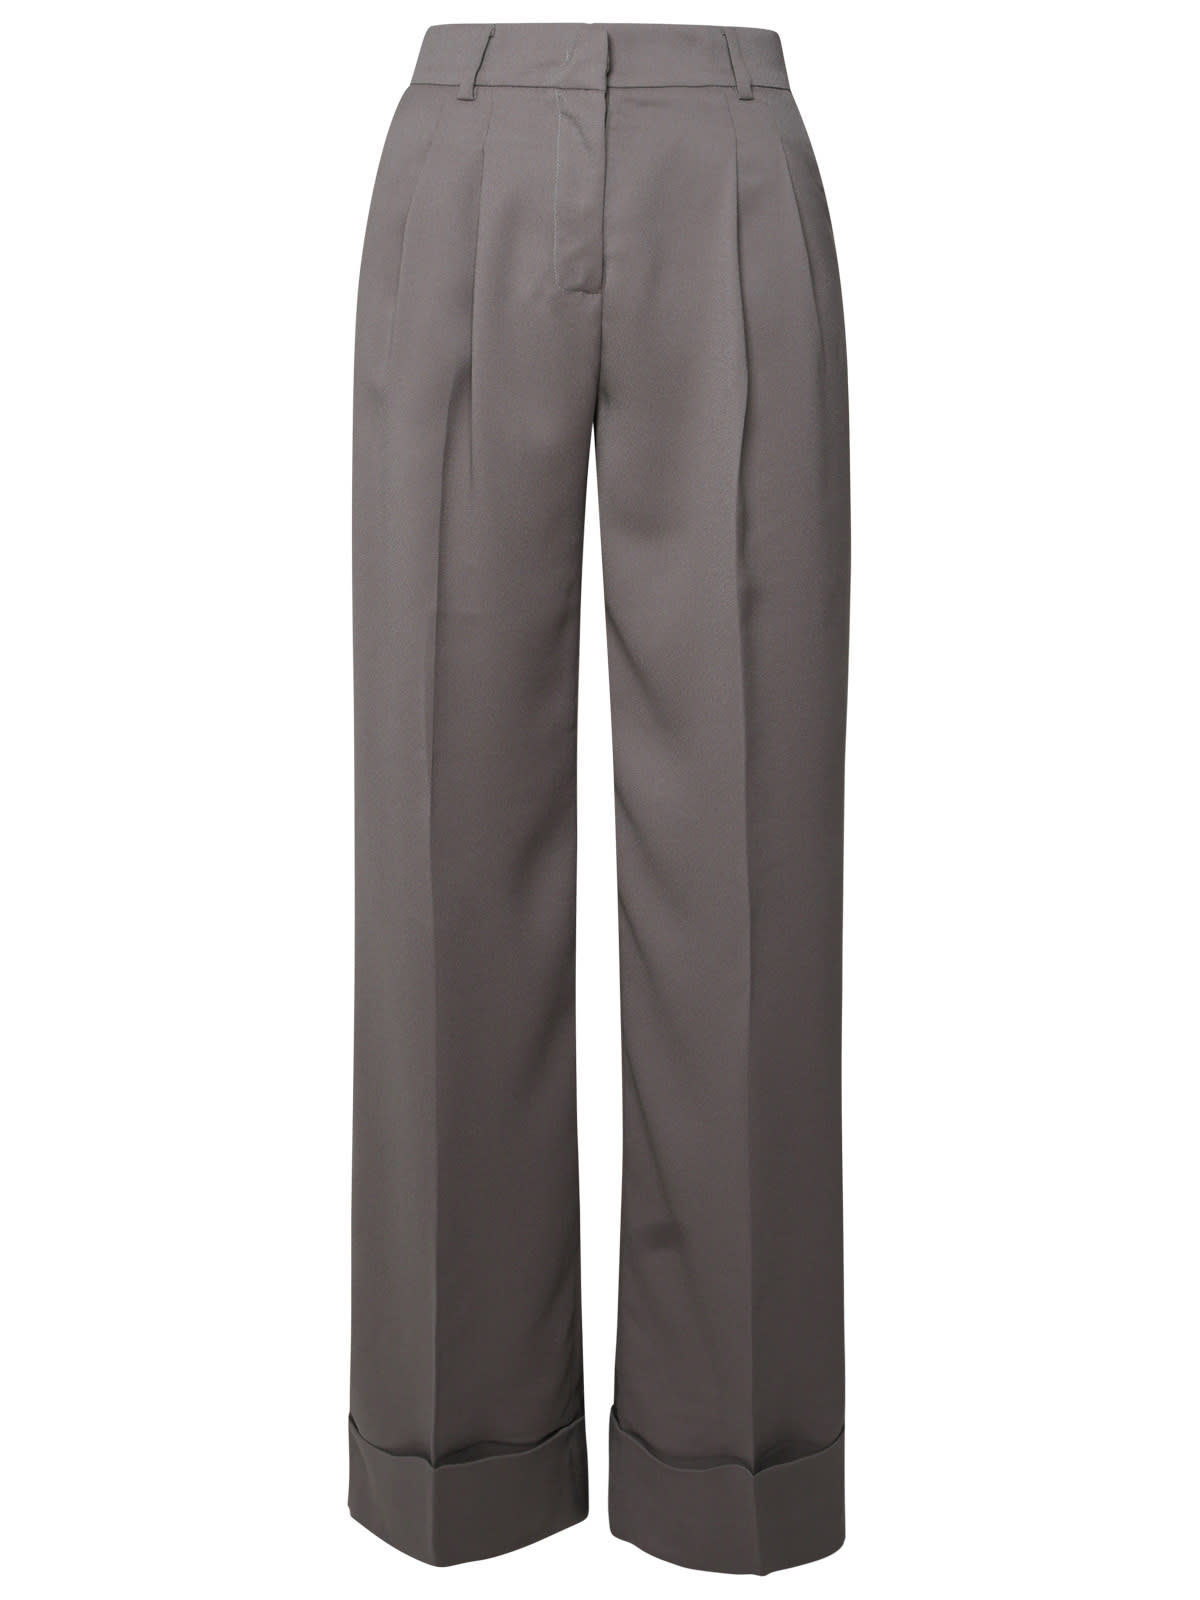 Grey Polyester Trousers